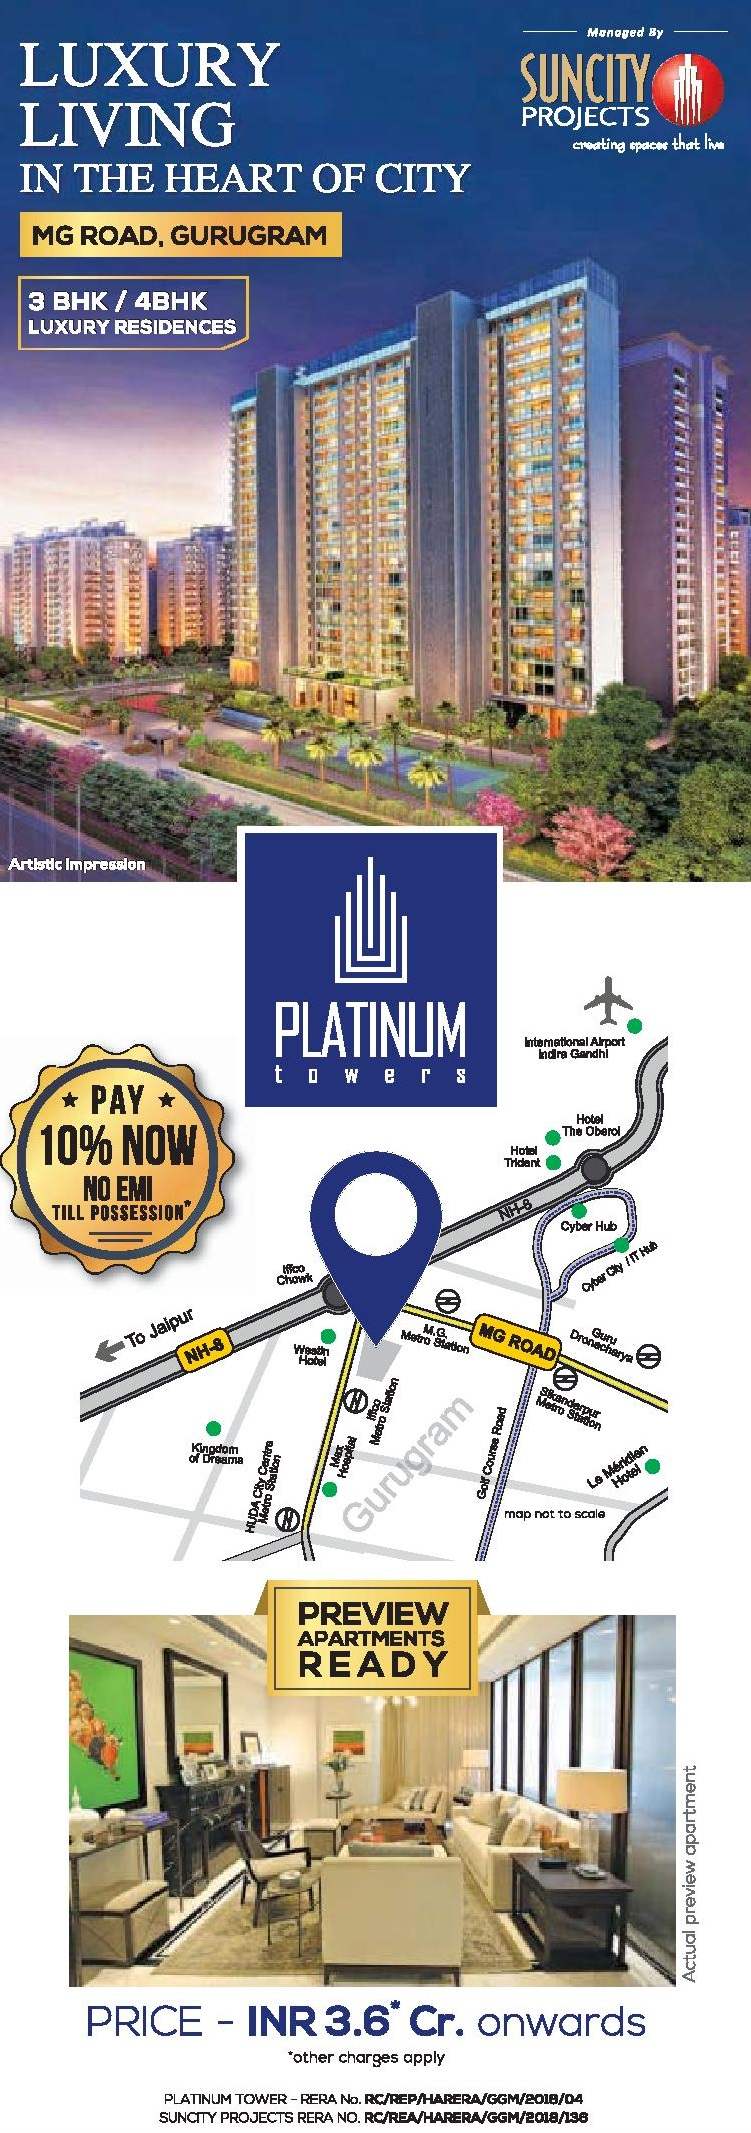 Pay 10% now & no EMI till possession at Suncity Platinum Towers in MG Road, Gurgaon Update